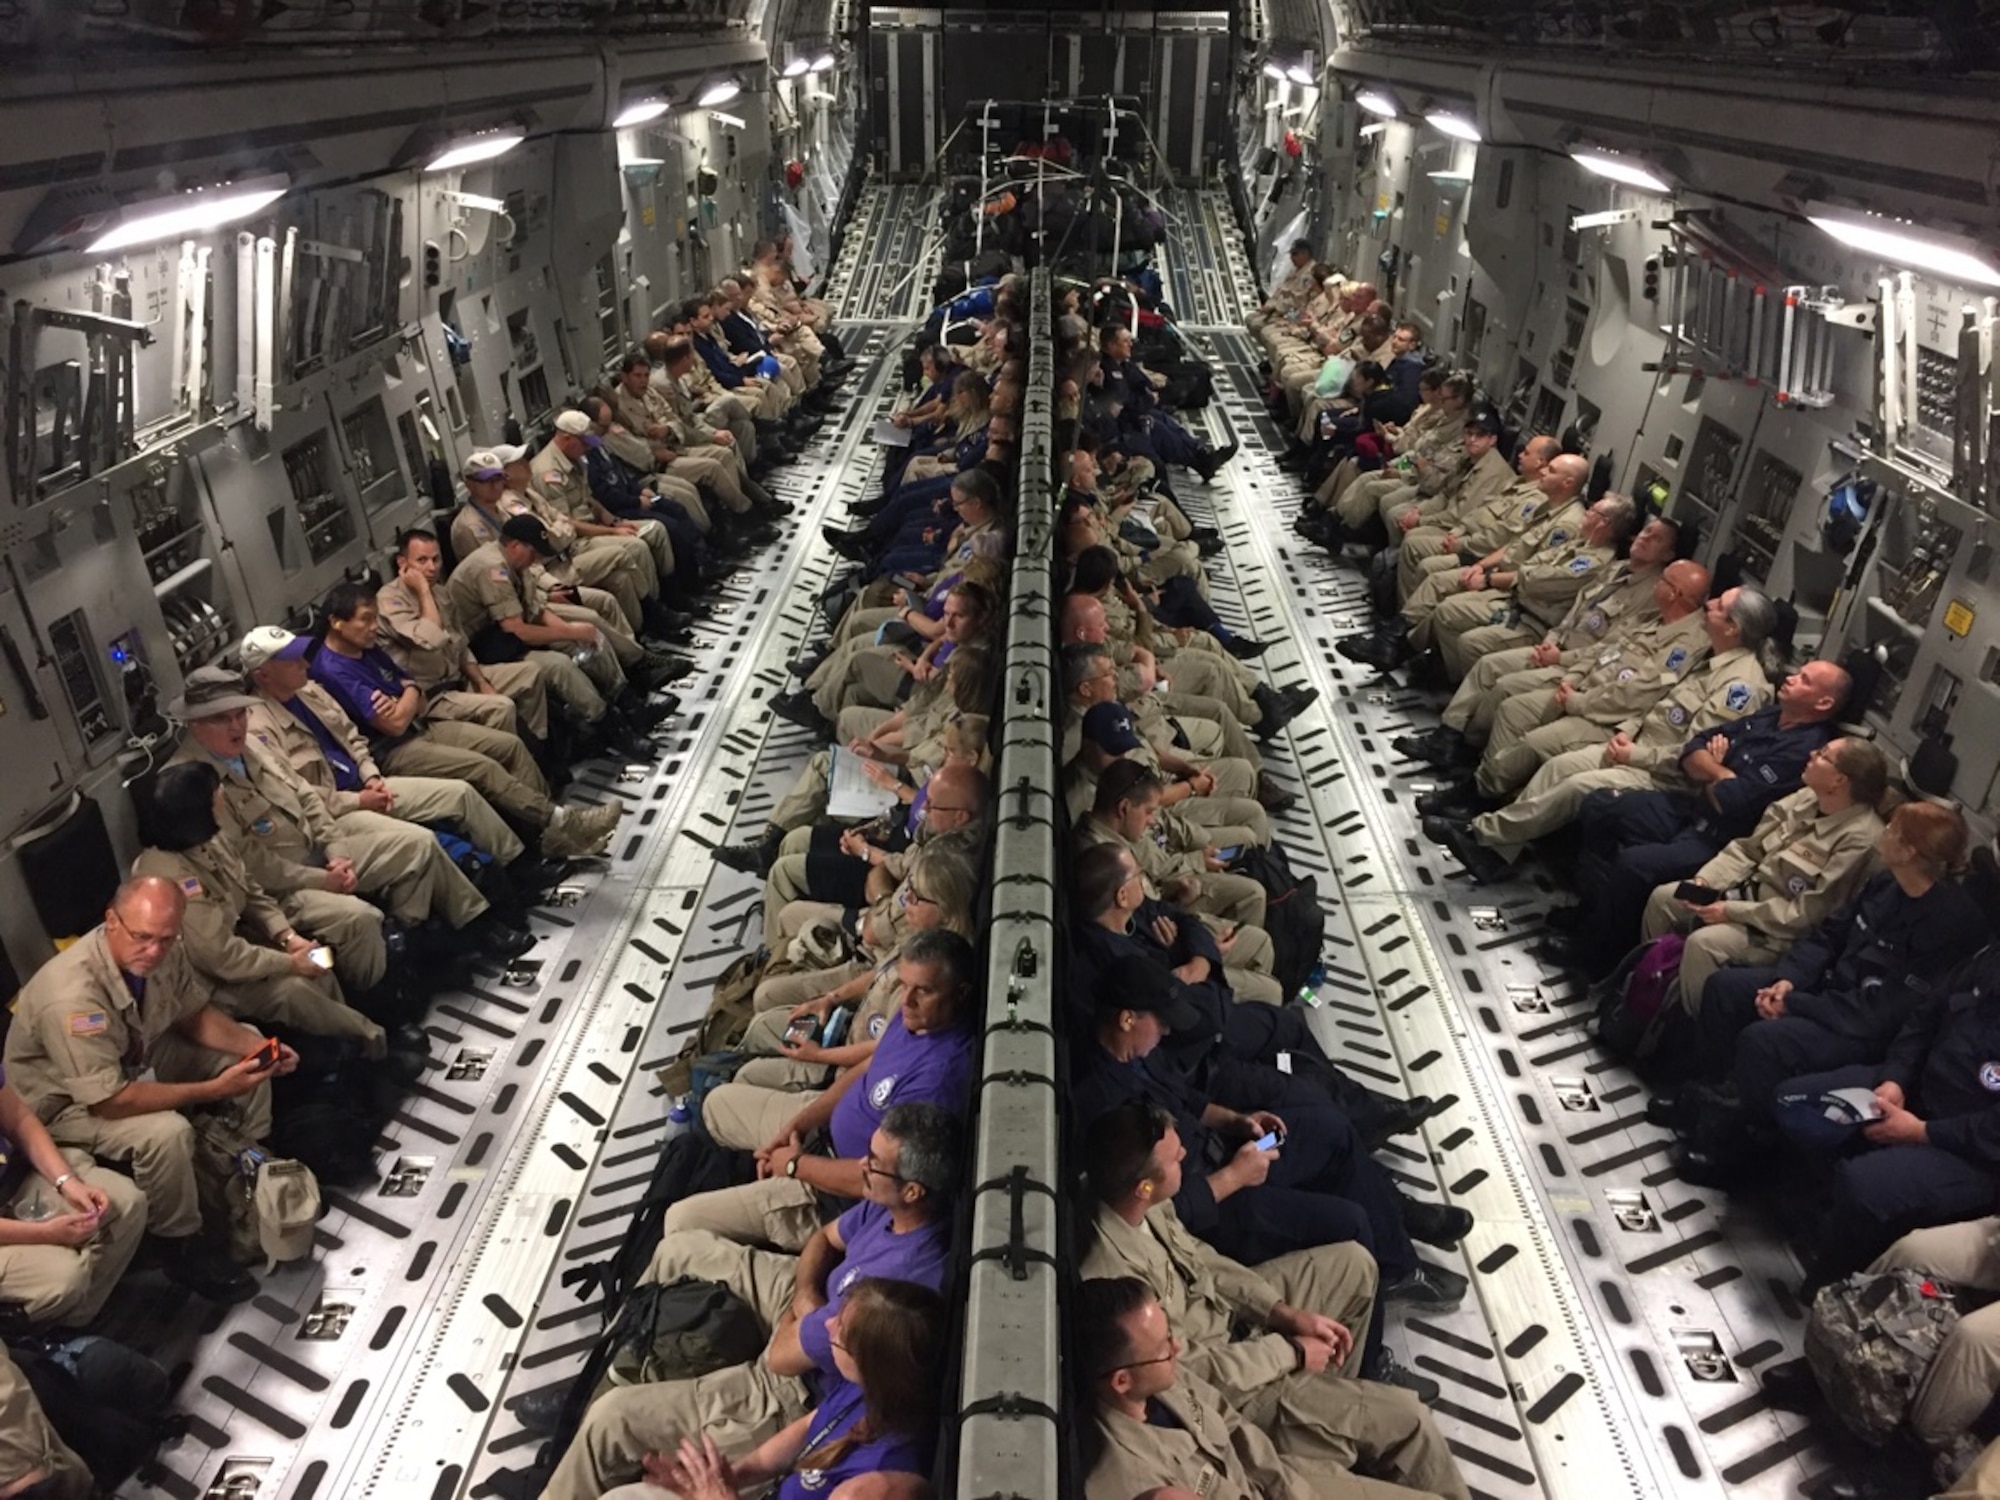 Healthcare professionals requested by the National Disaster Medical System and the U.S. Department of Health and Human Services are aboard a C-17 Globemaster III as part of the Hurricane Irma response.